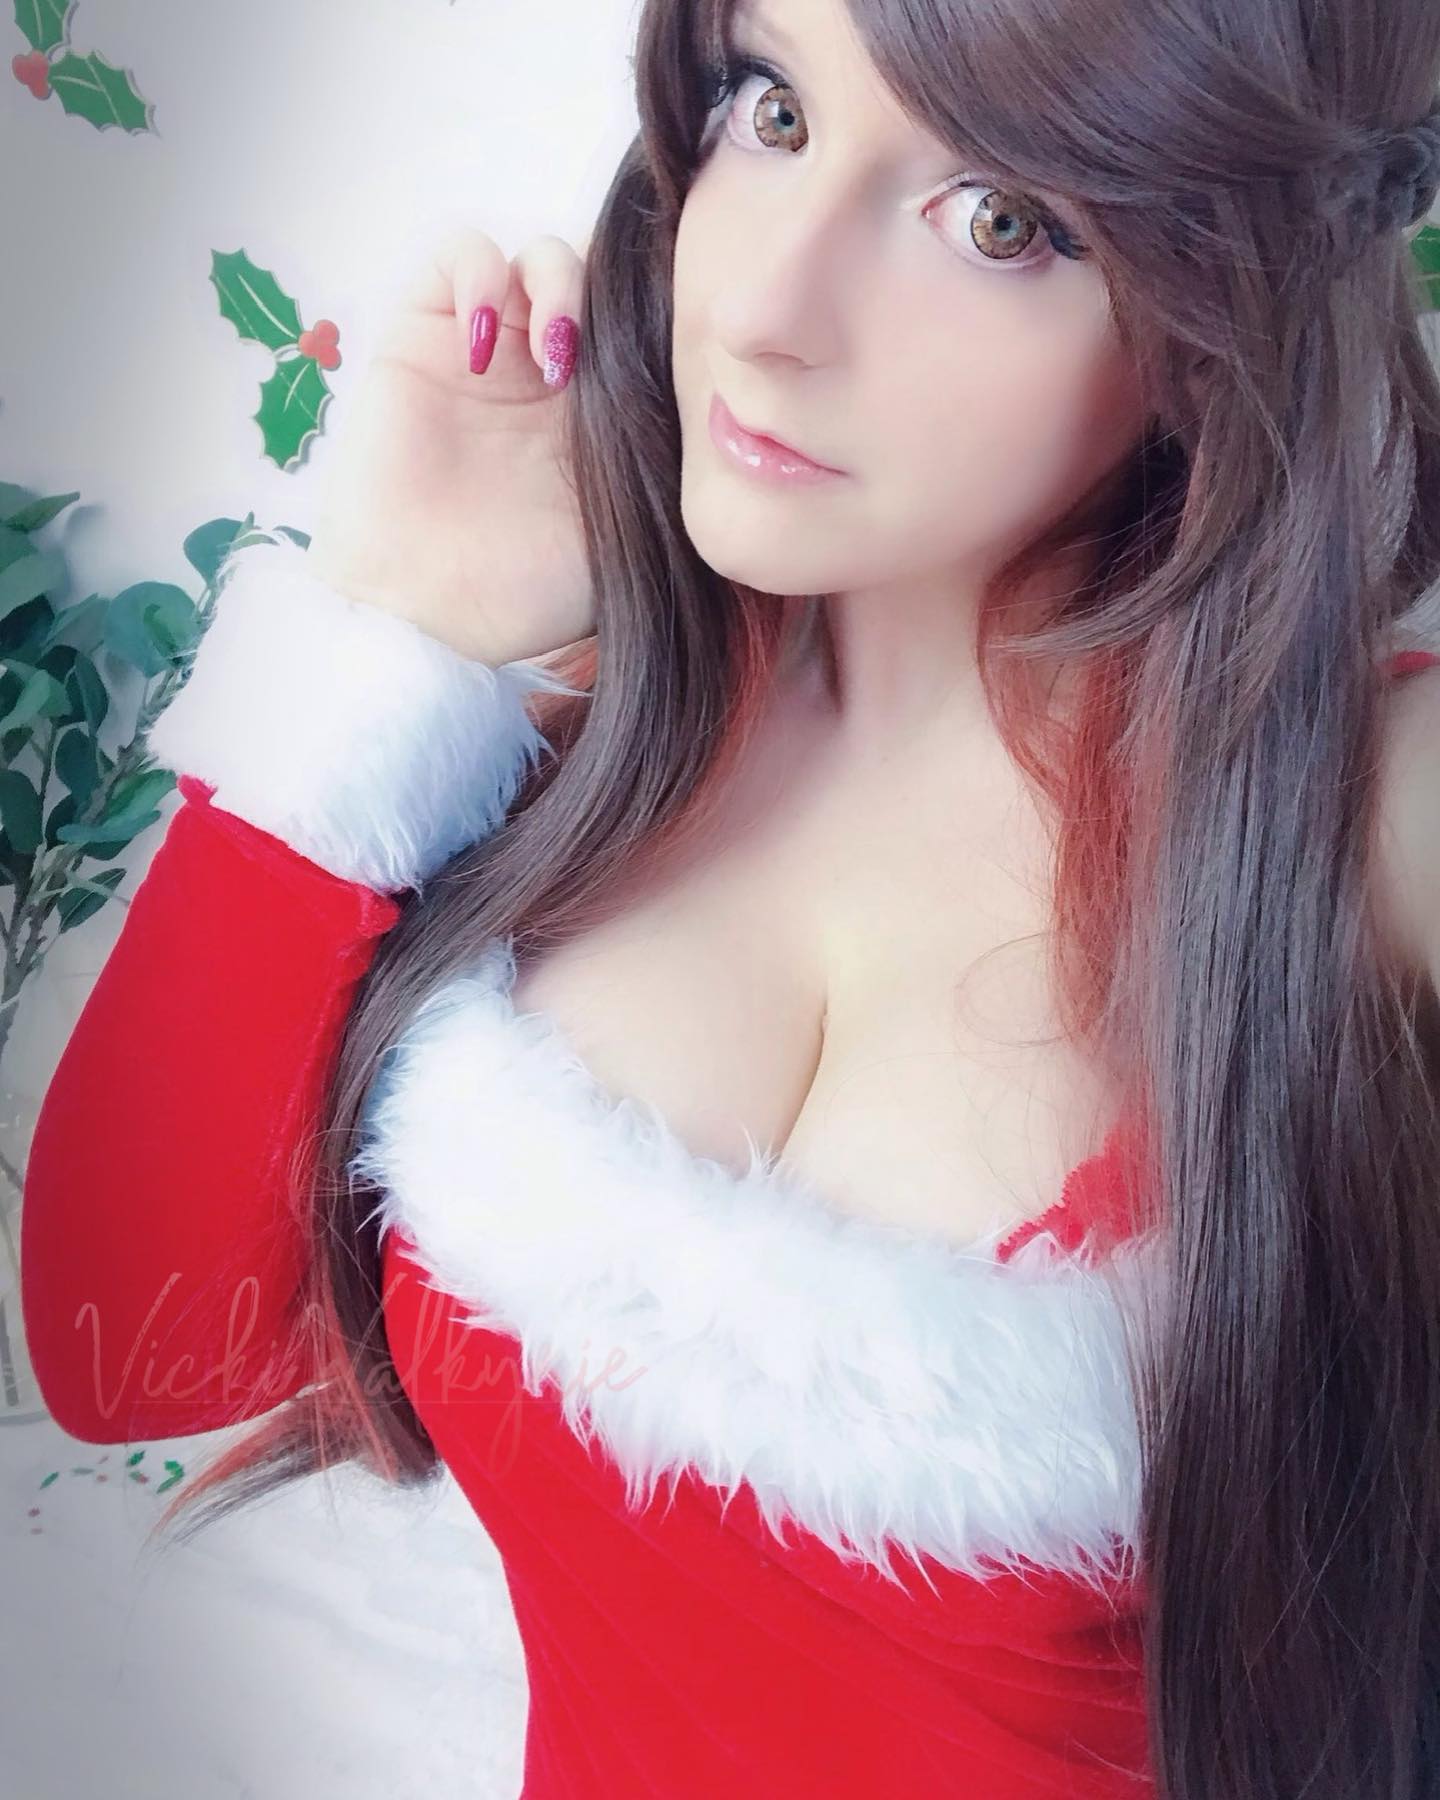 Merry Christmas!! 🎄 (I’m giving away a gift on my 0nly Faammzz! Check Lℹ️nk in bℹ️0 for details!) 🎁

#cosplay #cosplayer #cosplaygirls #cosplaygirl #cosplayersofinstagram #animecosplay #chizurumizuhara #rentagirlfriend #chizurumizuharacosplay #rentagirlfriendcosplay #christmascosplay #animegirlcosplay